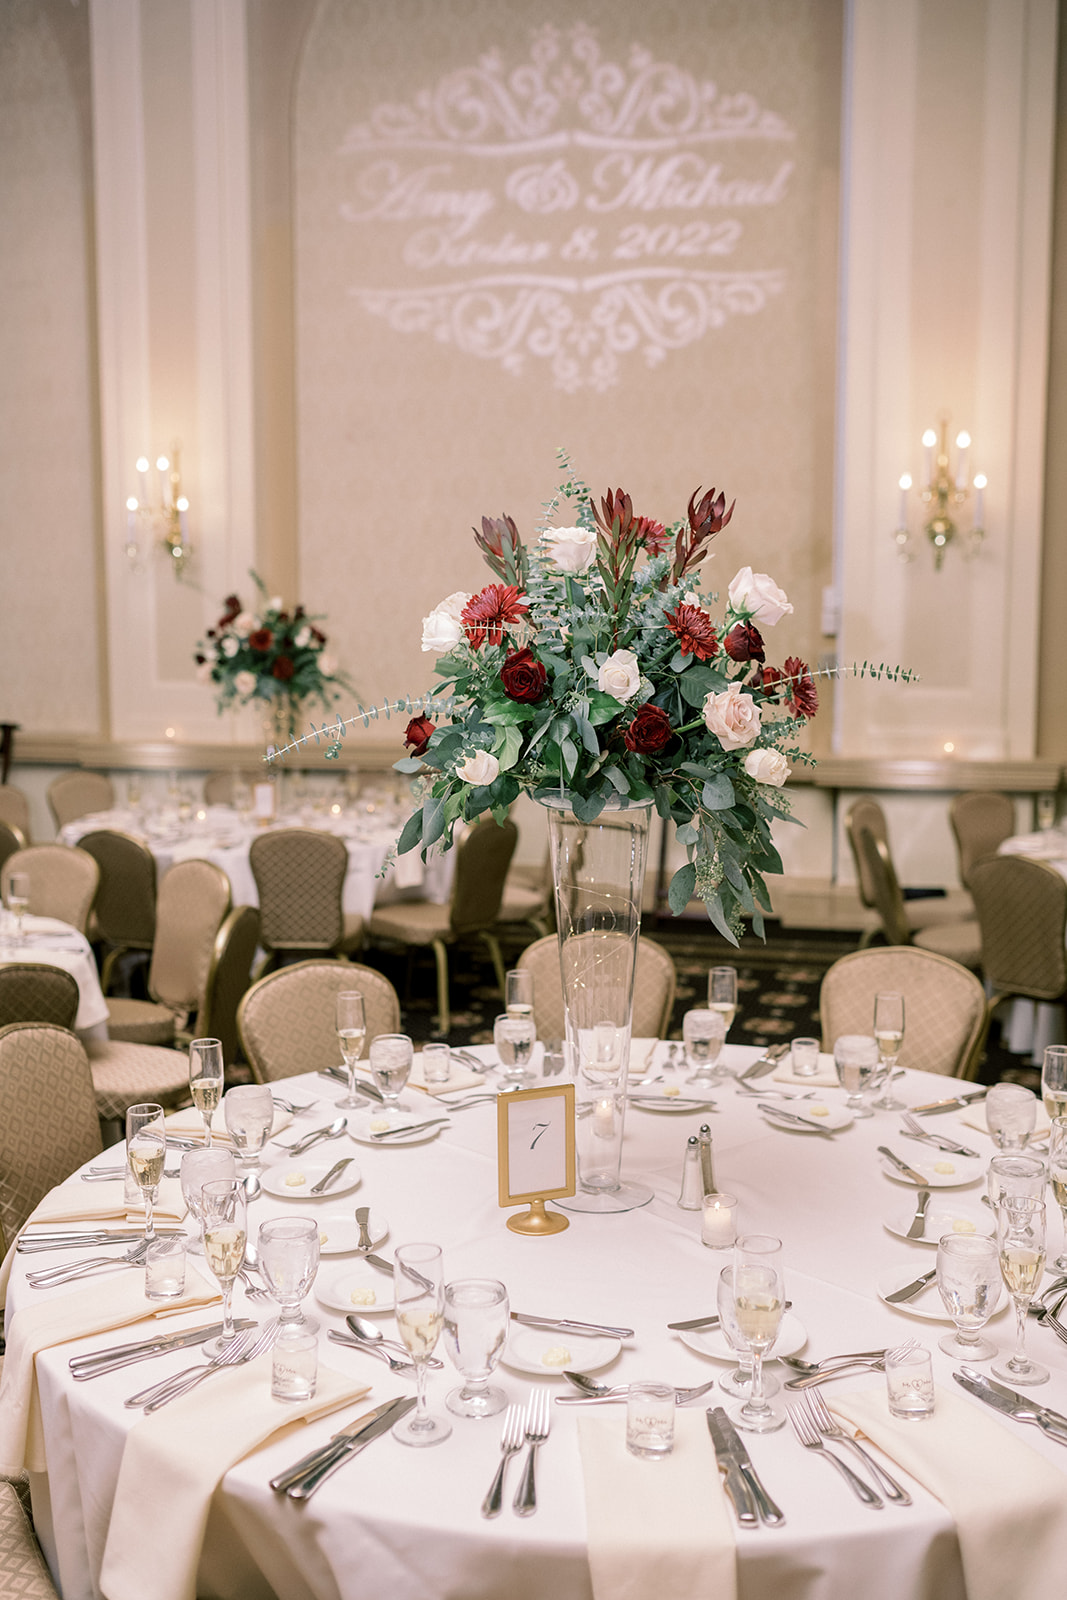 Pennsylvania wedding photographer captures reception with white tables and table settings before wedding